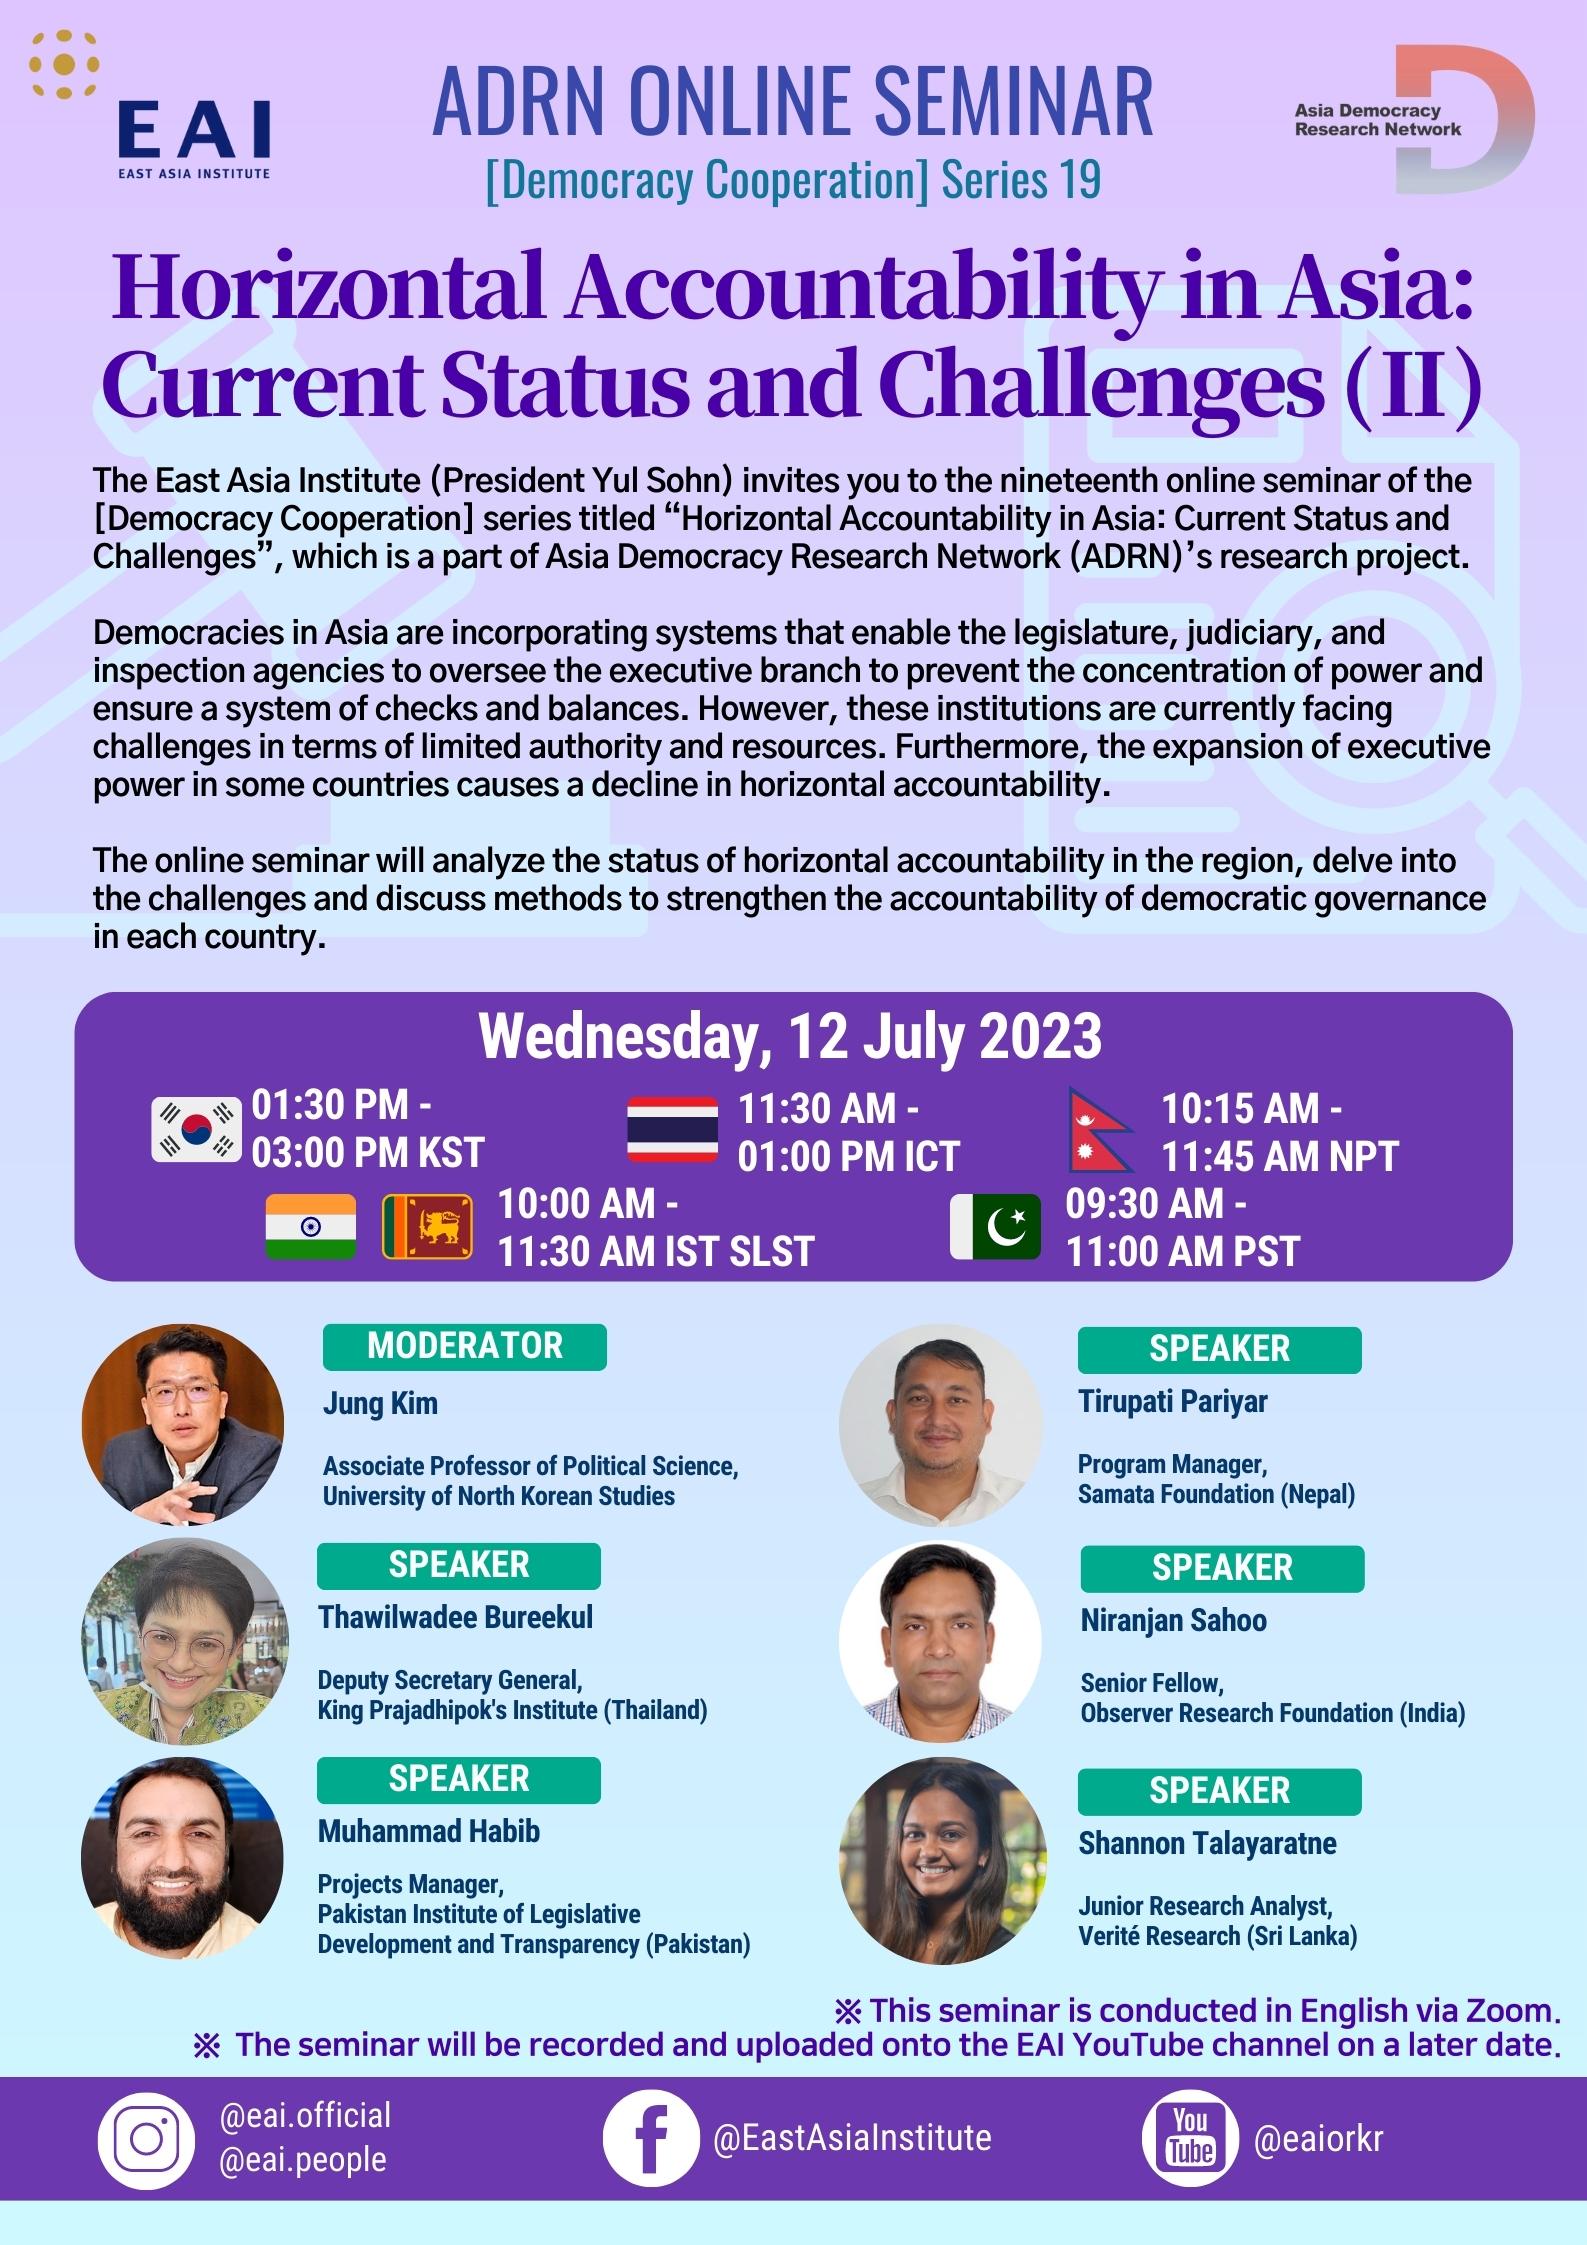 [ADRN Online Seminar] Horizontal Accountability in Asia: Current Status and Challenges (Ⅱ)